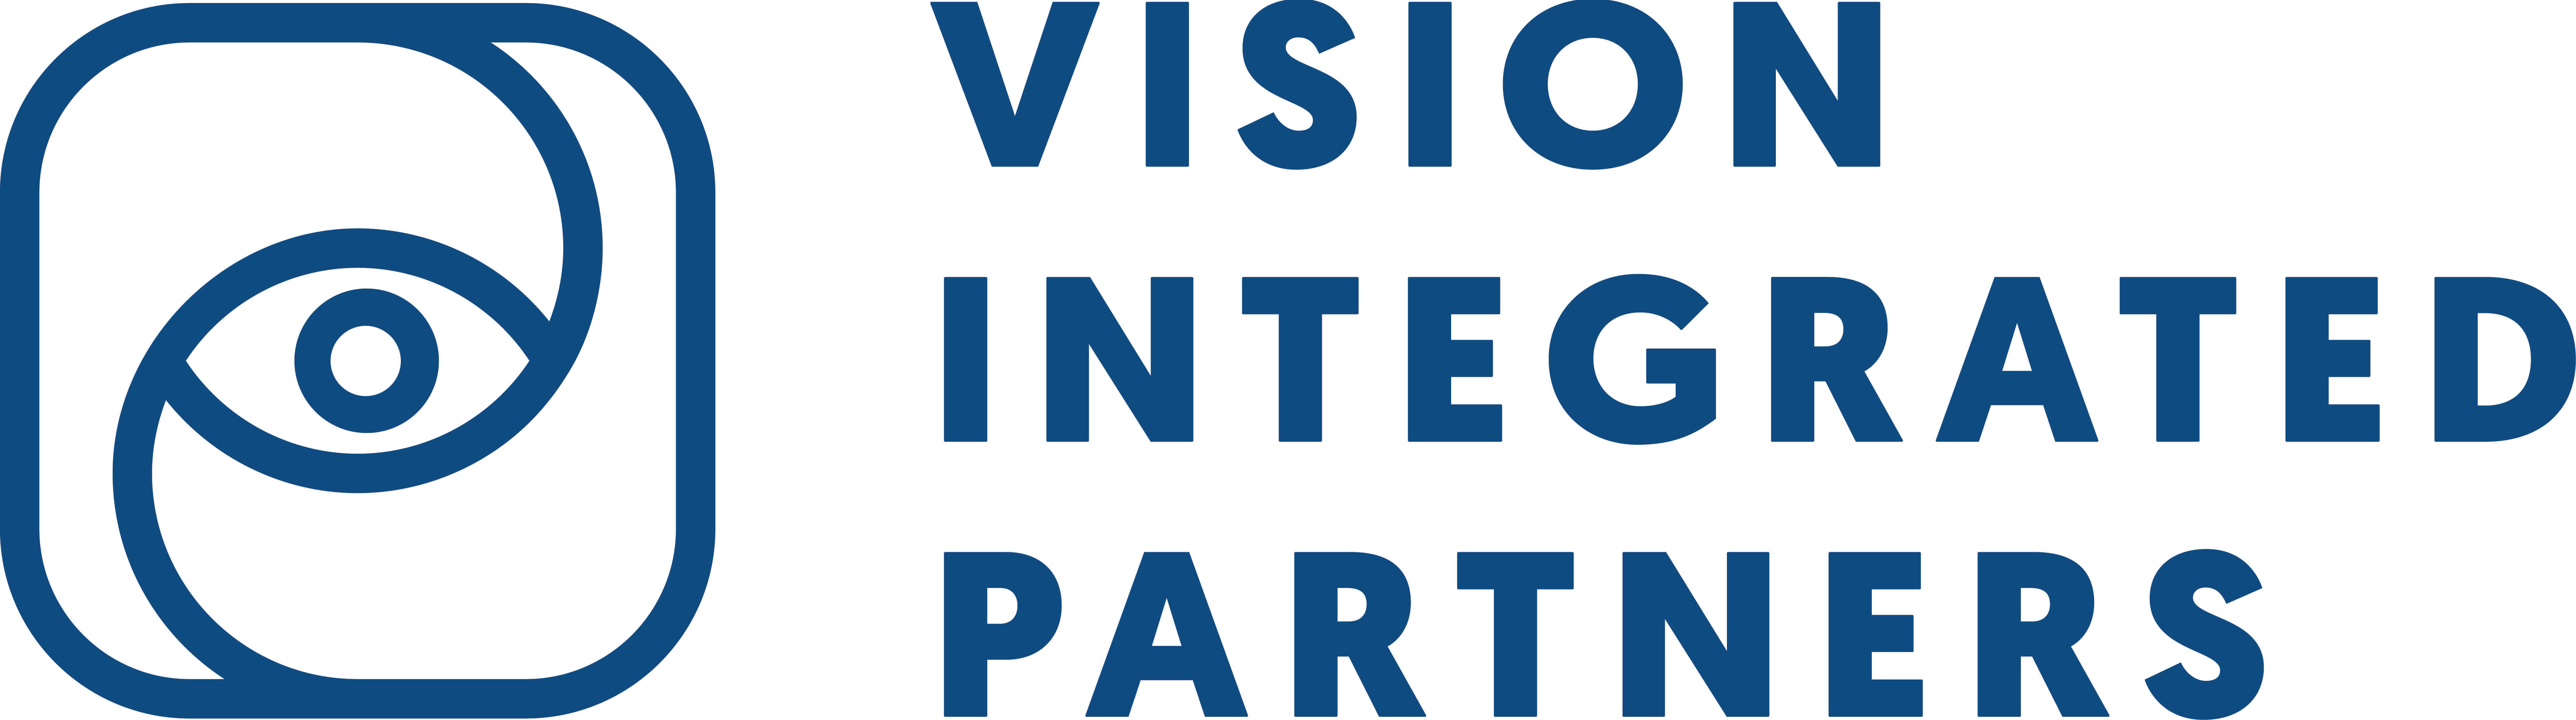 Vision Integrated Partners Logo